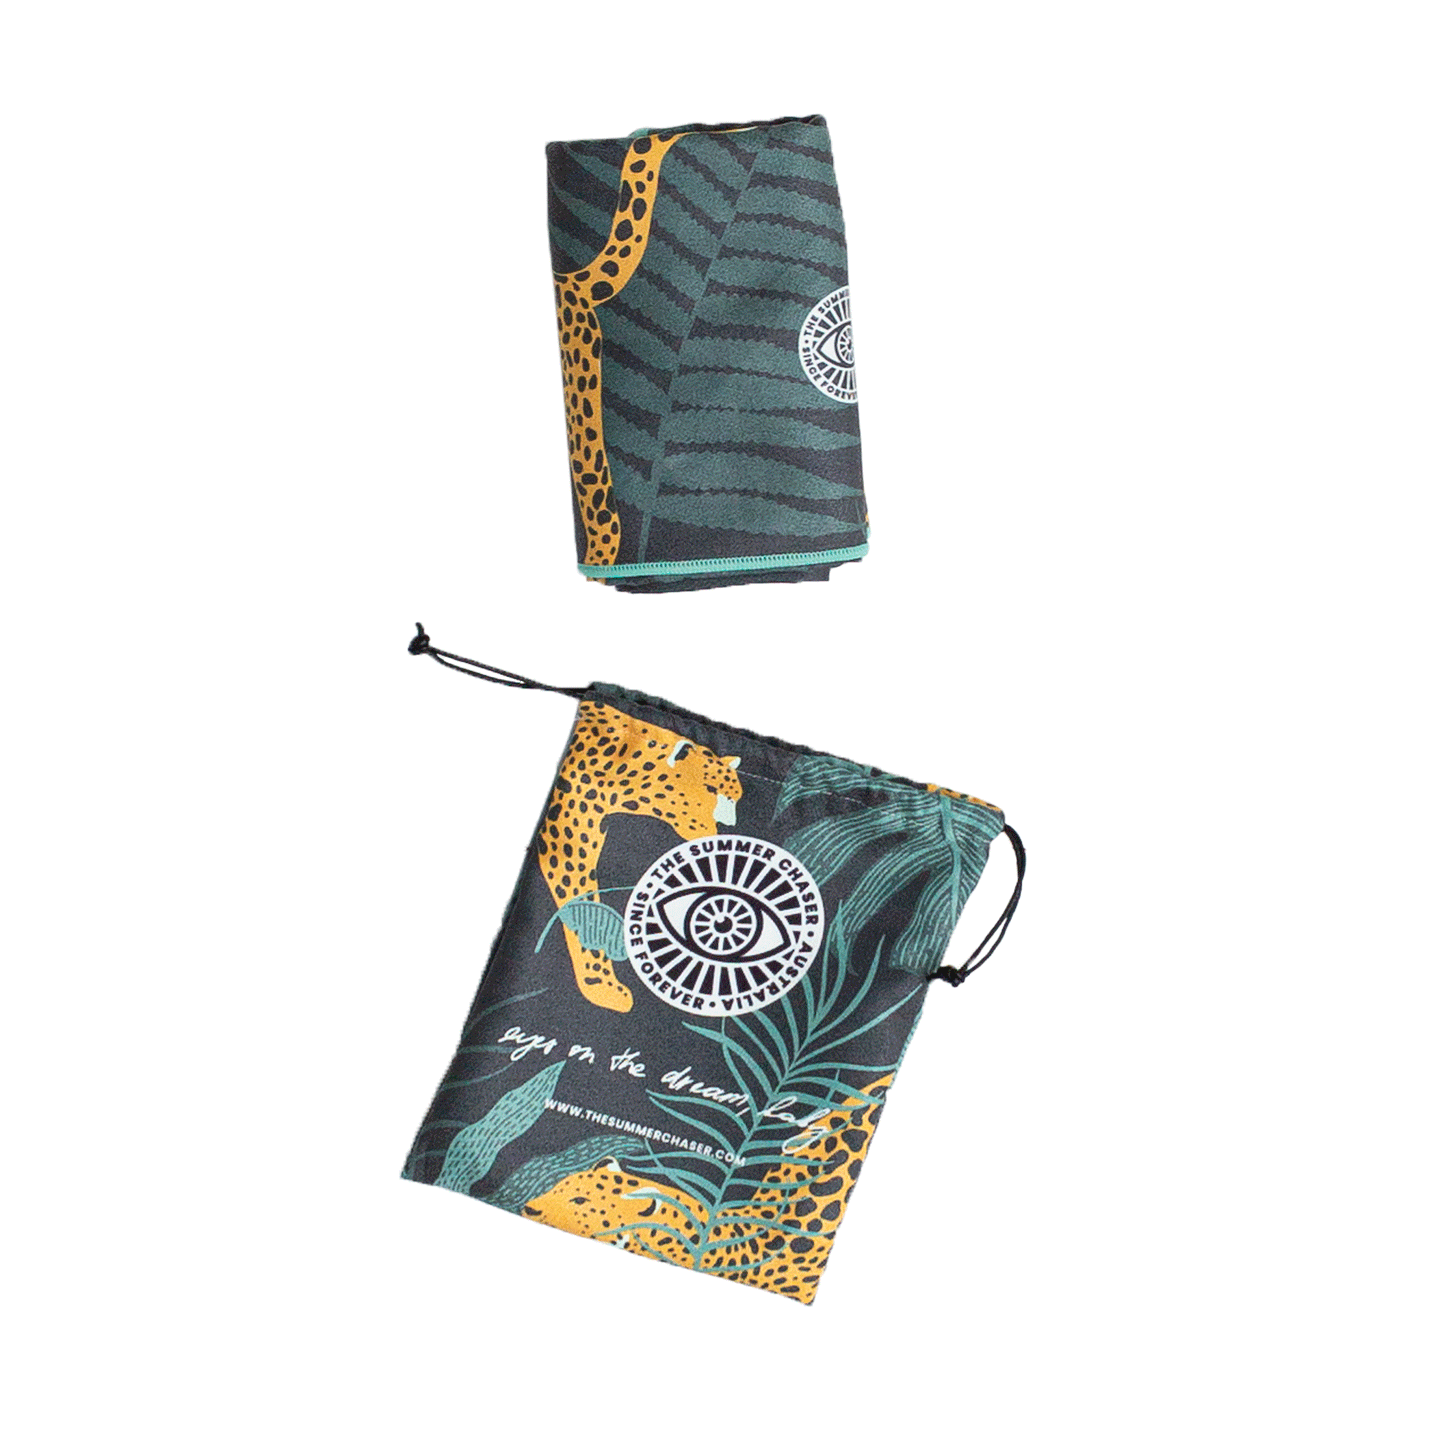 The Summer Chaser travel towel comes with a matching drawstring bag.